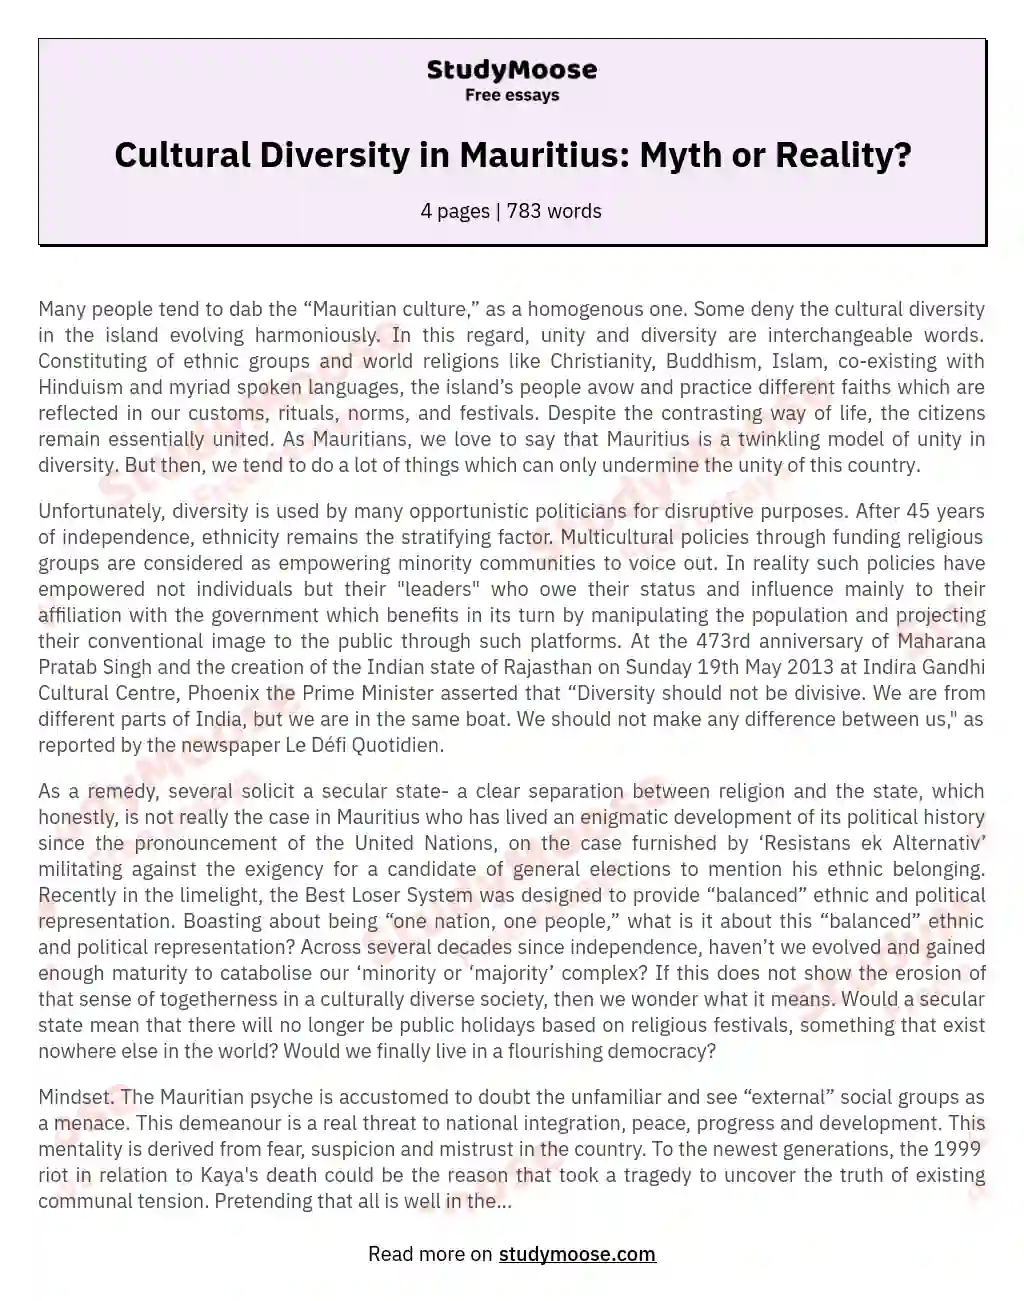 Cultural Diversity in Mauritius: Myth or Reality? essay